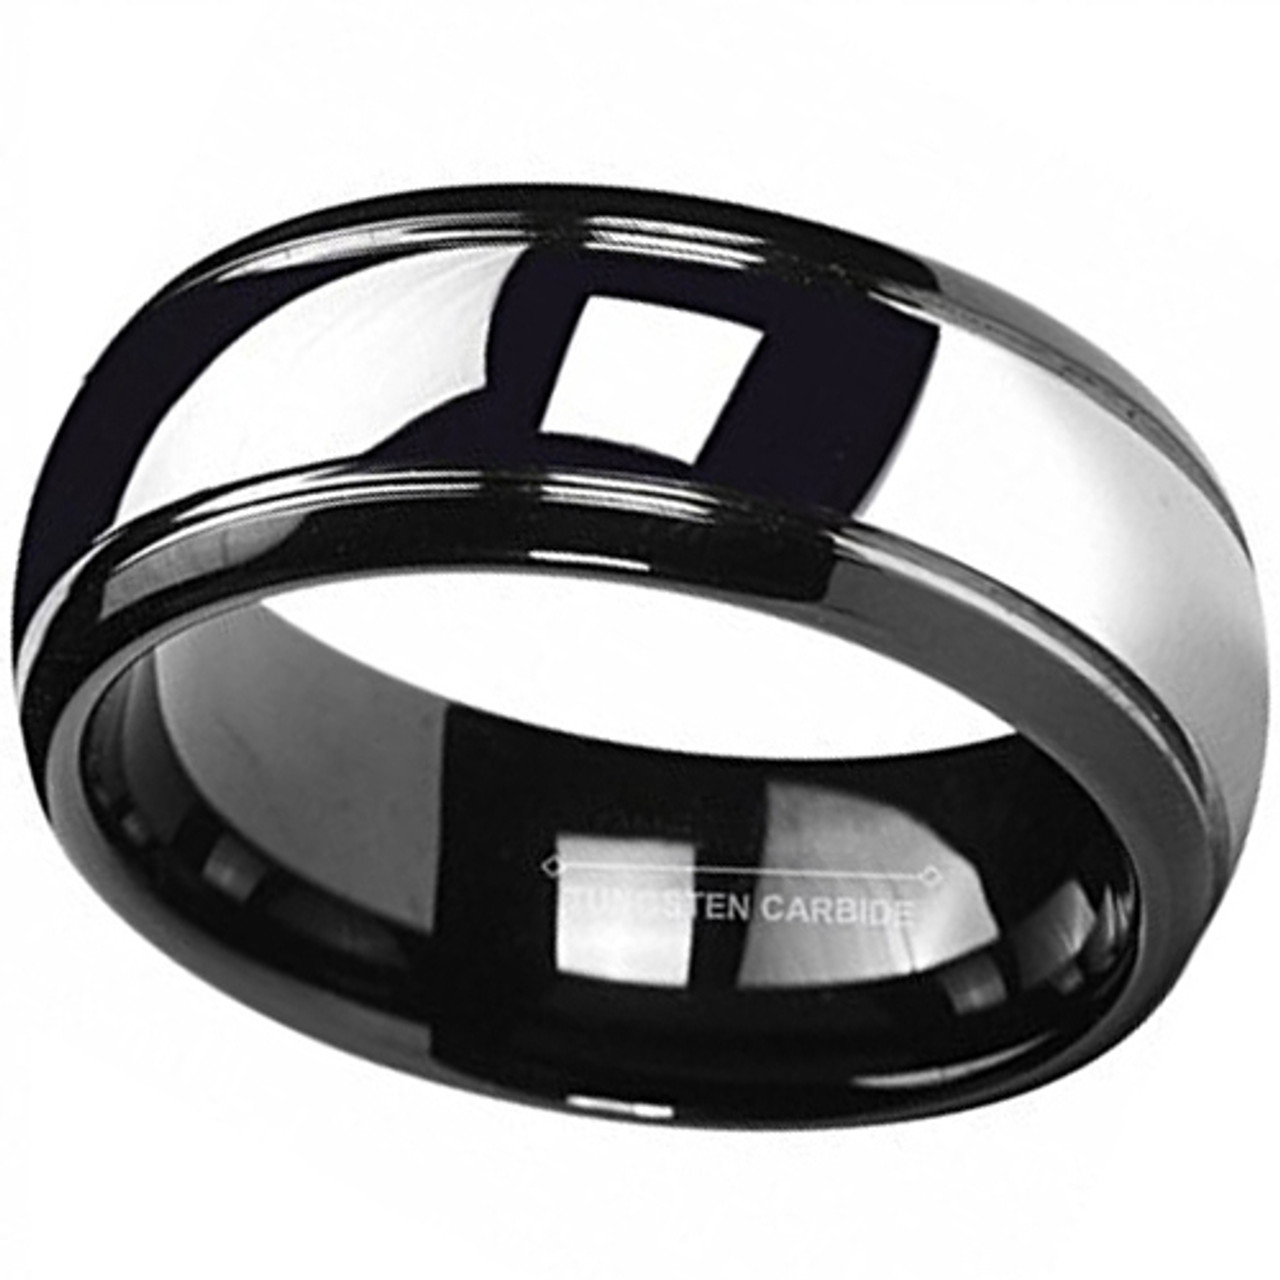 (8mm) Unisex or Men's Black and Silver Dome Gunmetal Tungsten Carbide Wedding Ring Band